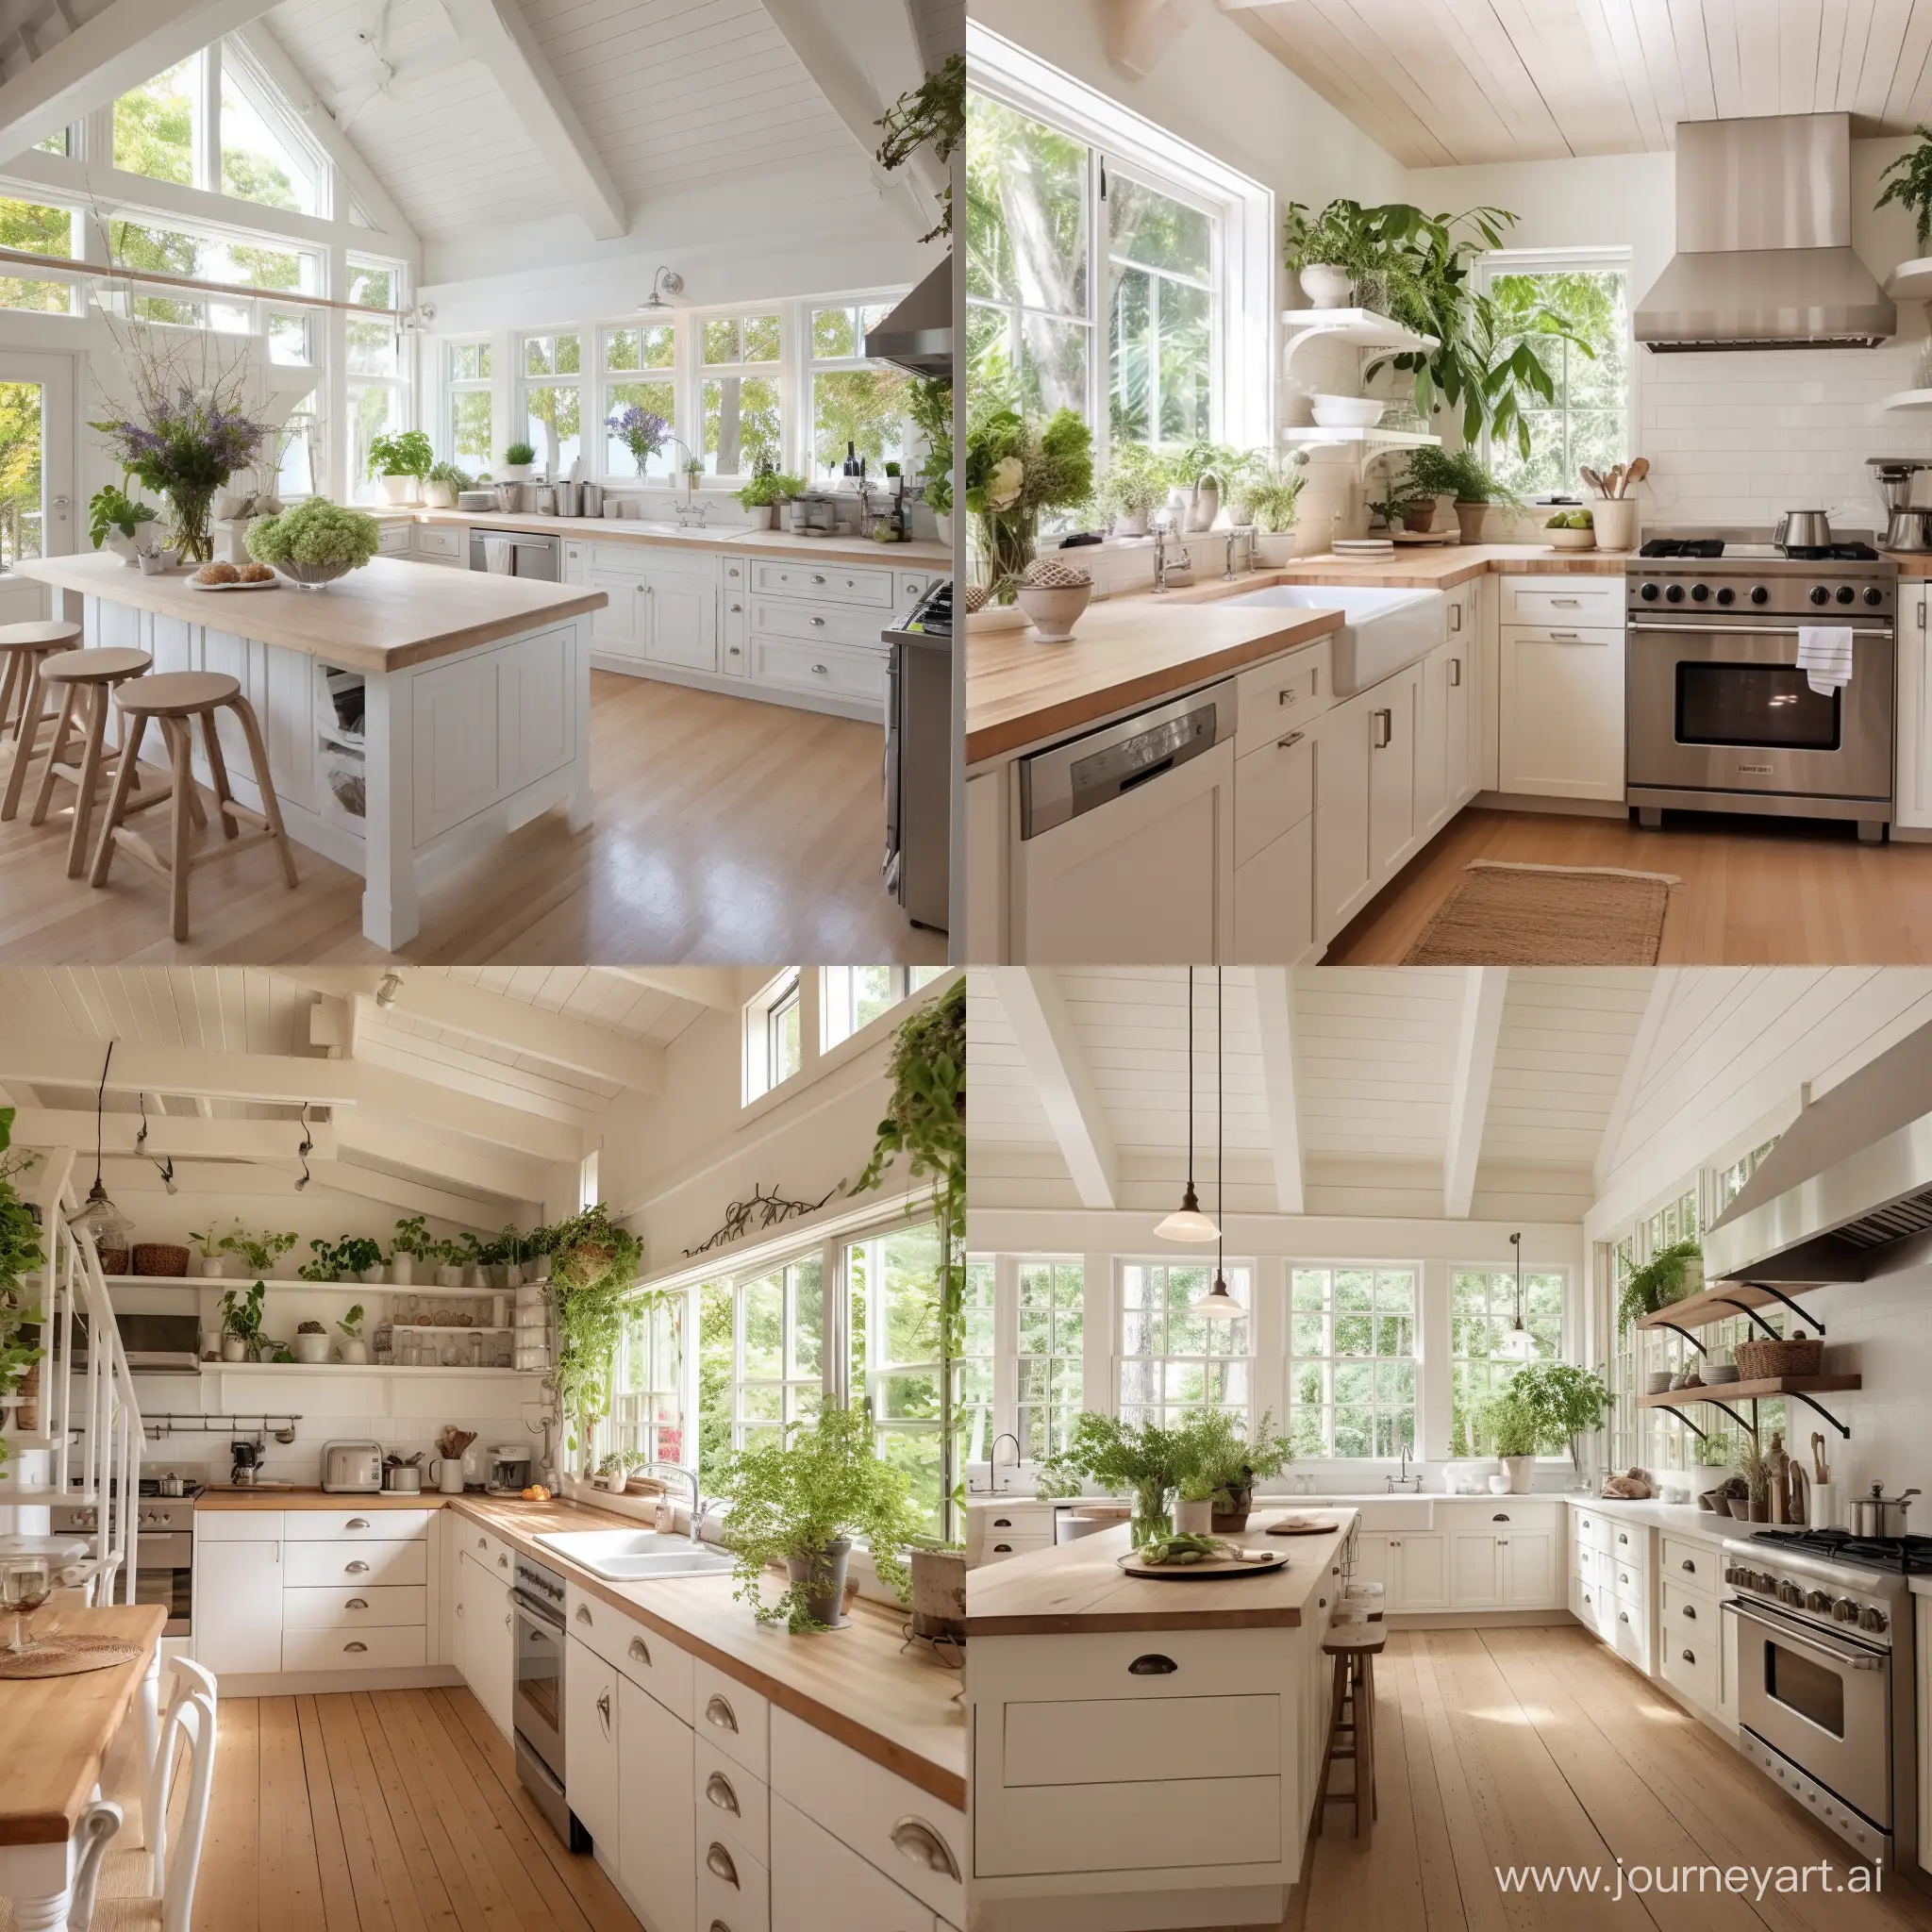 Cozy-CottageStyle-Kitchen-with-Wood-Accents-and-Plants